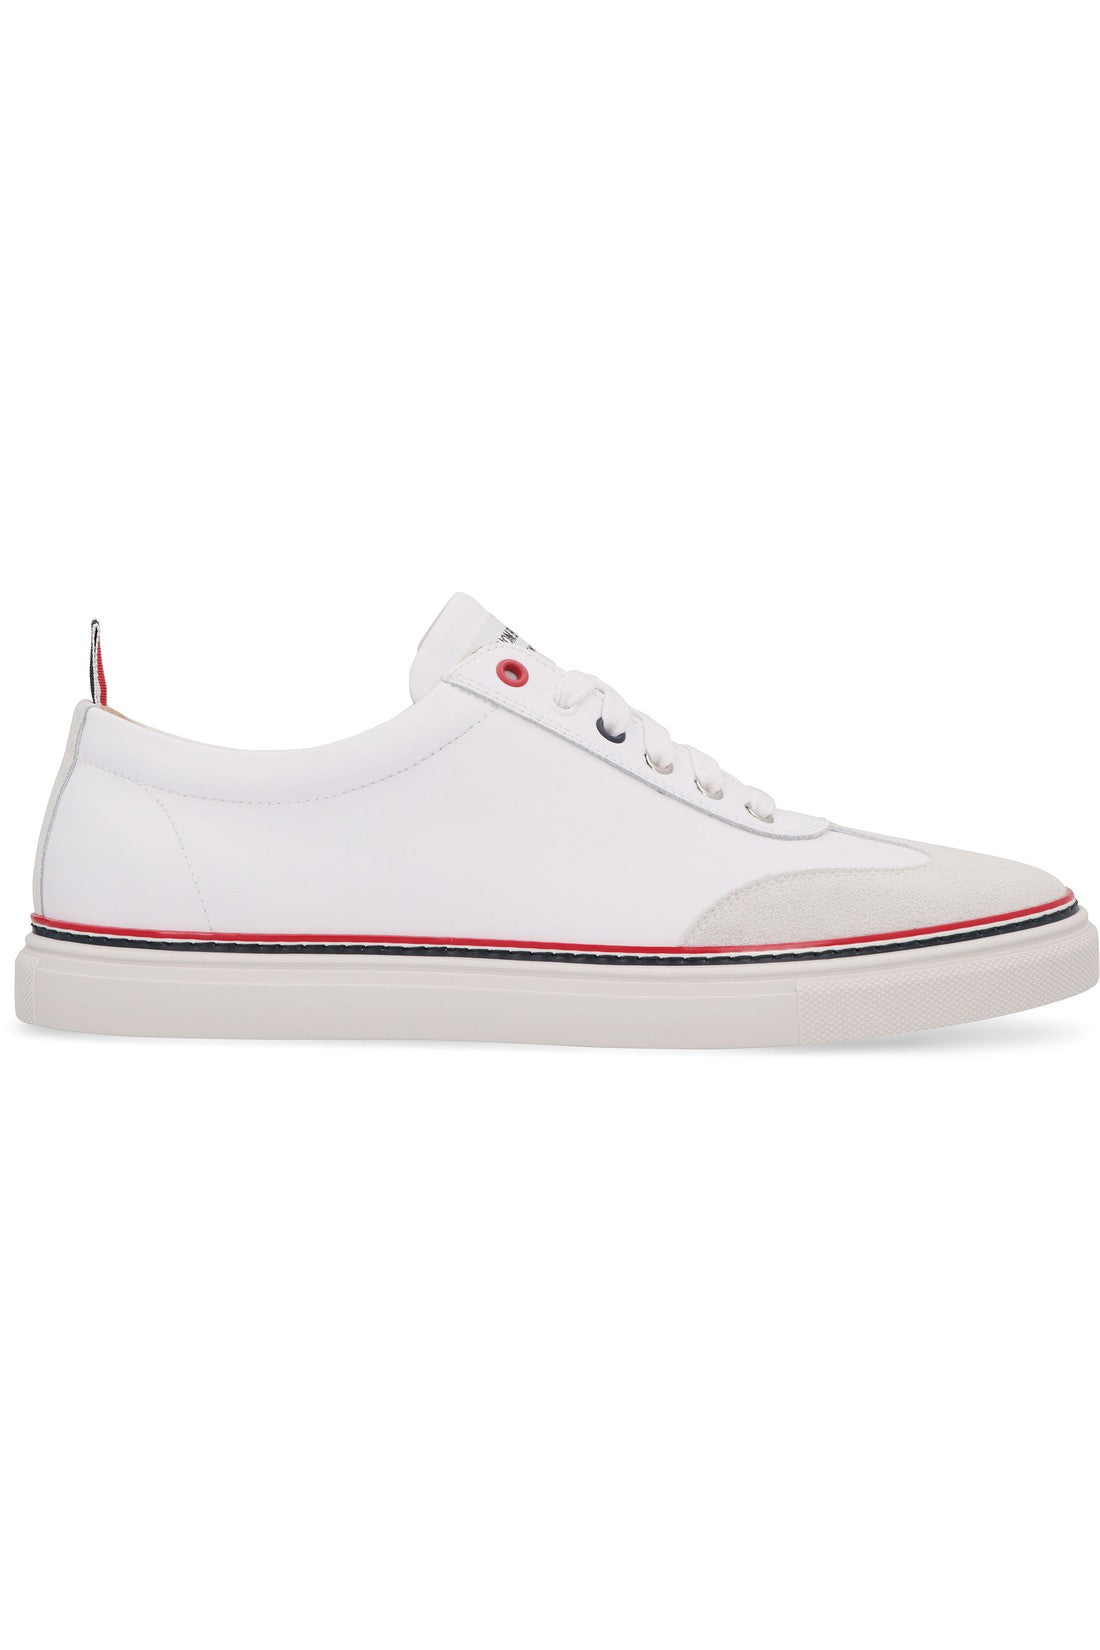 Thom Browne-OUTLET-SALE-Leather low-top sneakers-ARCHIVIST